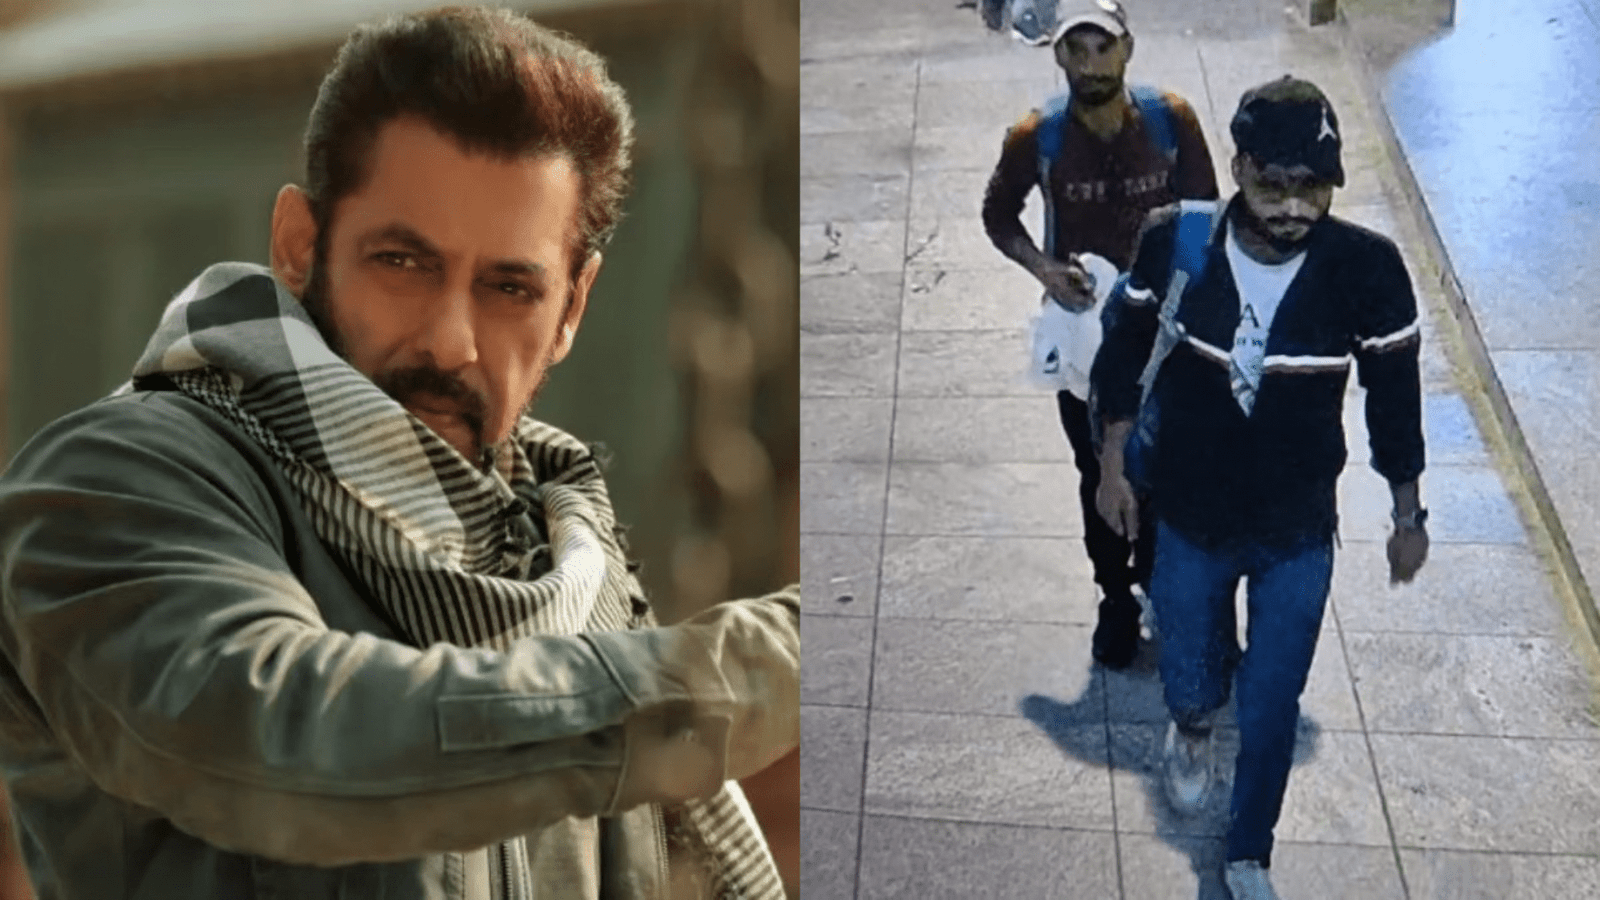 Salman Khan: Two arrested for firing at his home – Mumbai police